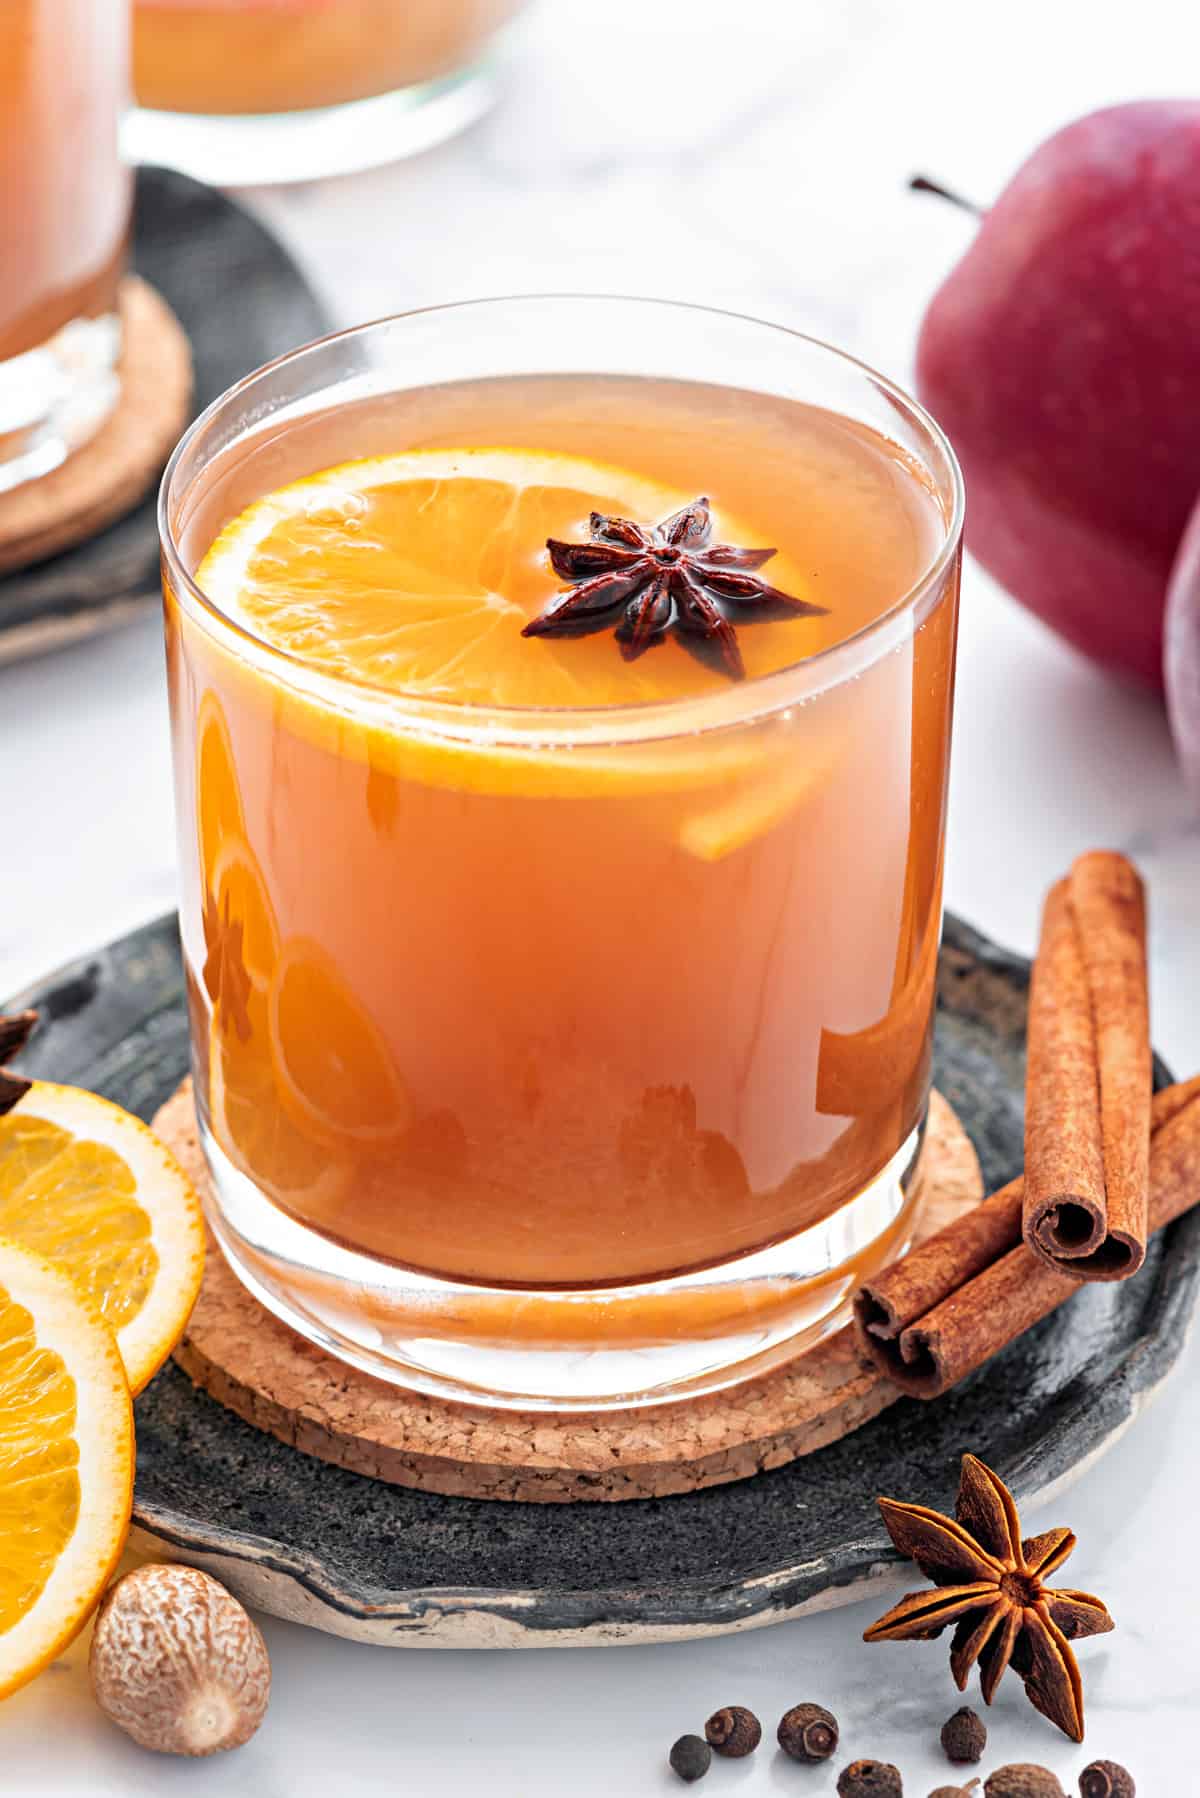 homemade apple cider in a glass with a slice of orange and star anise garnish